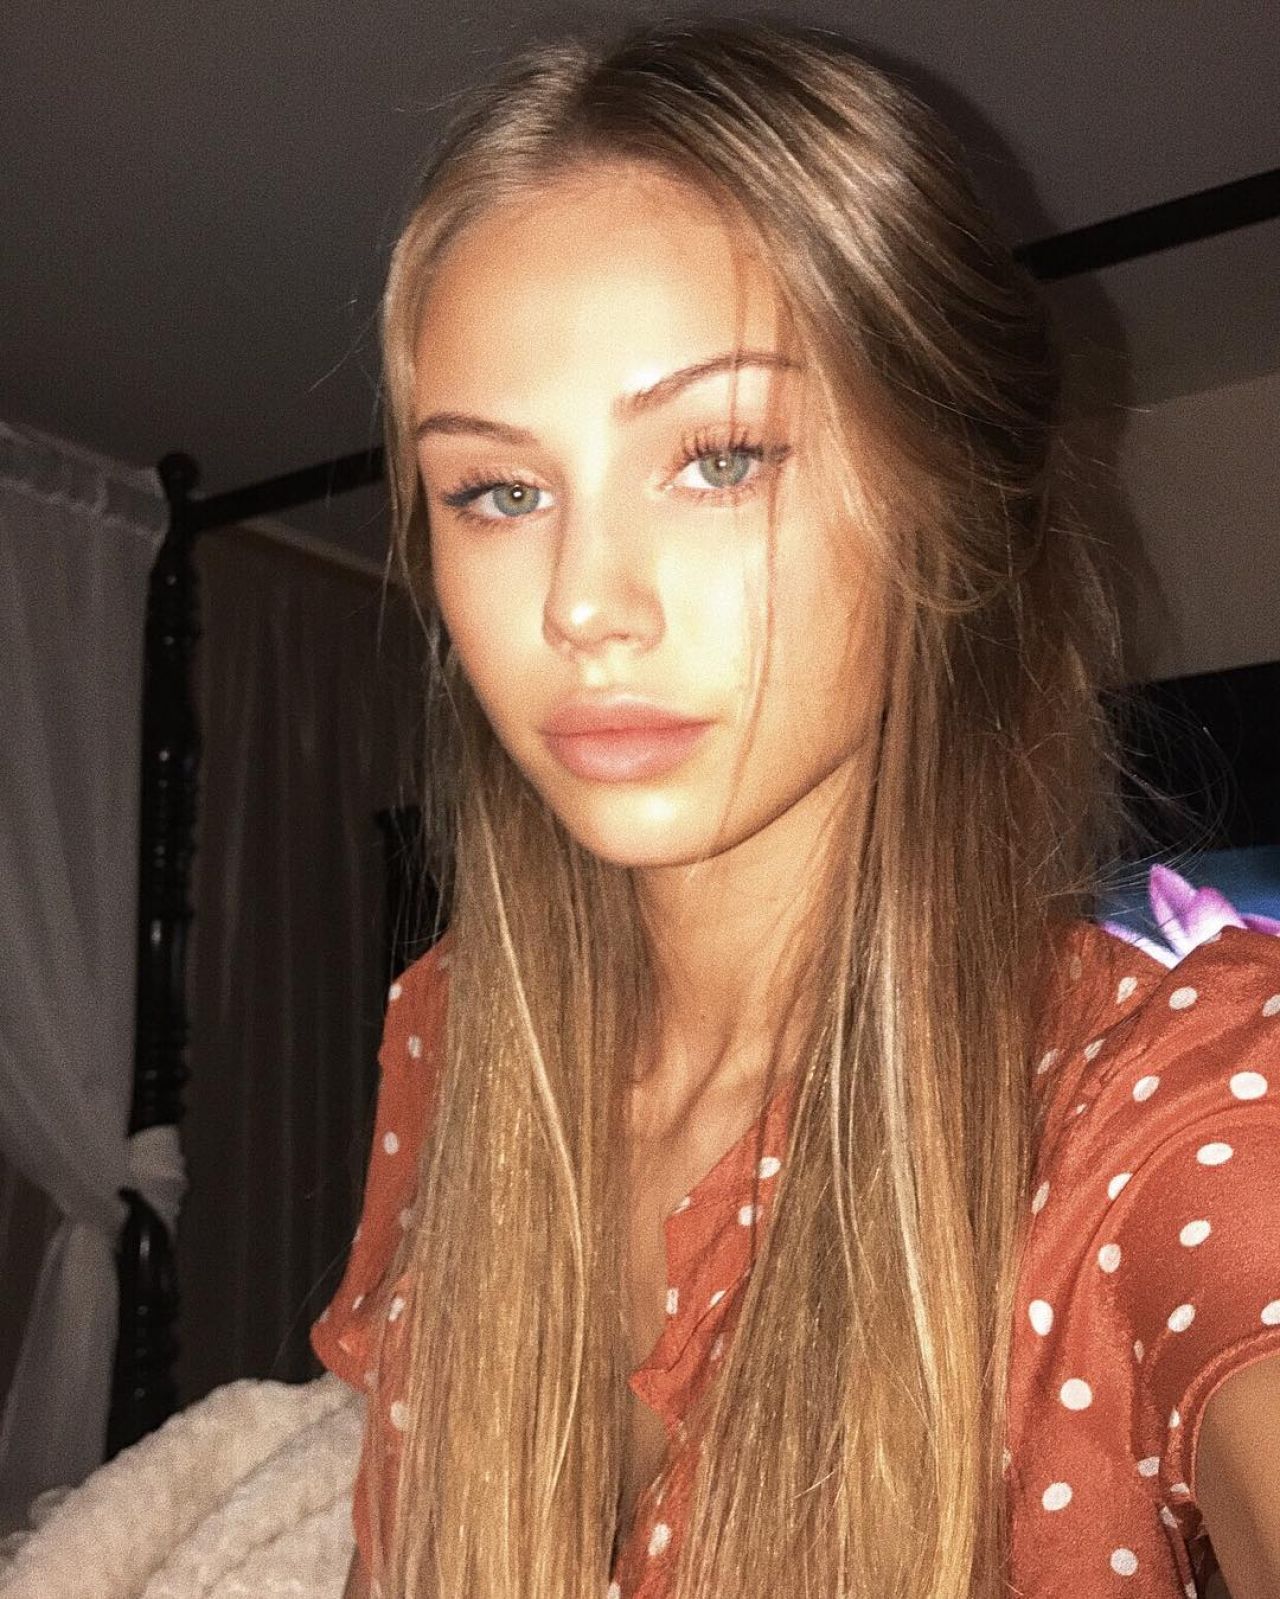 Scarlett Leithold - Personal Pics, May 2019.